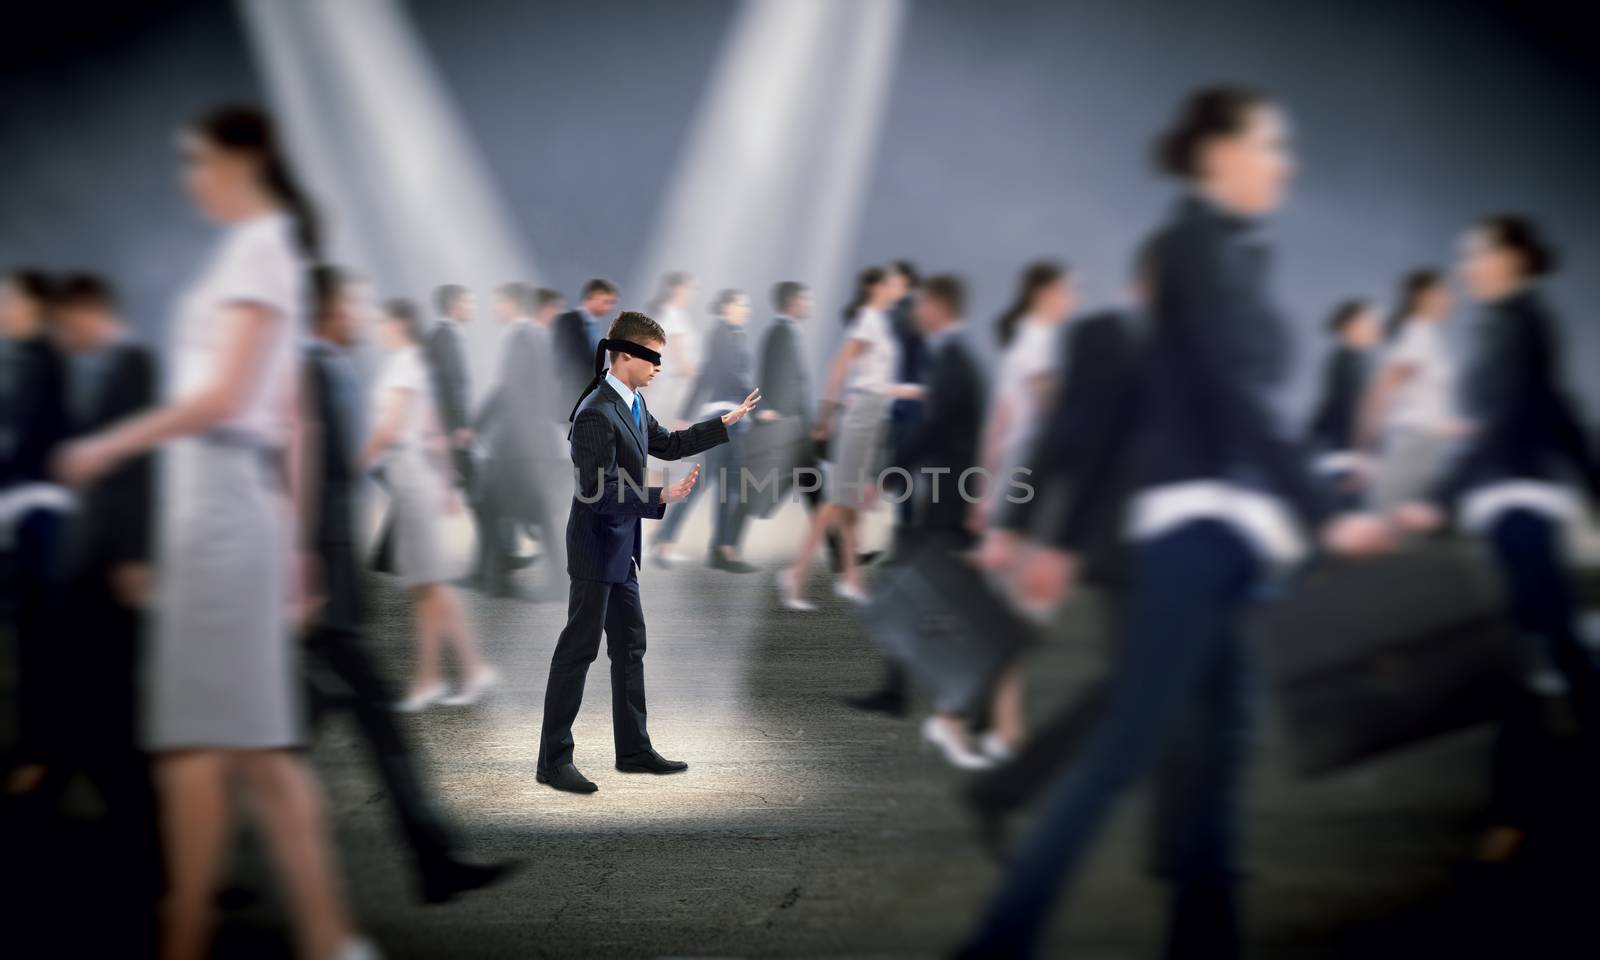 young blindfolded man. his arms and looking for a way out